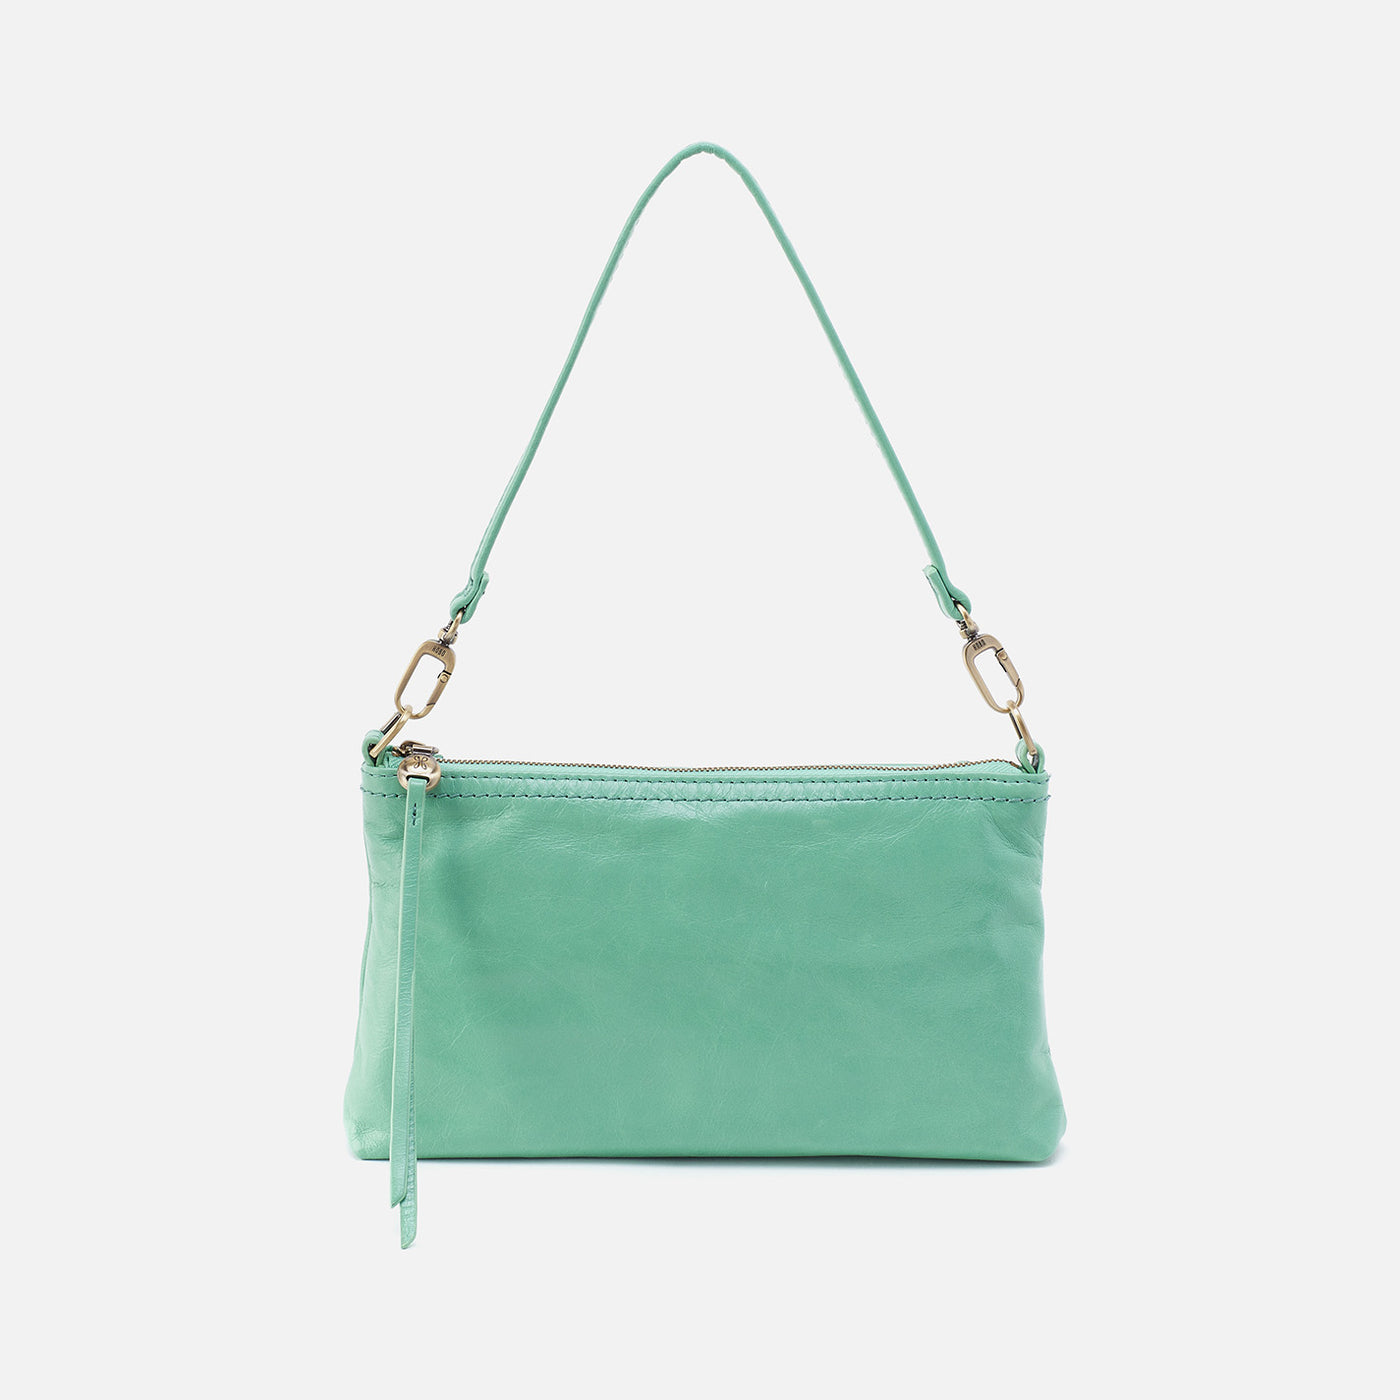 Darcy Crossbody in Polished Leather - Seaglass